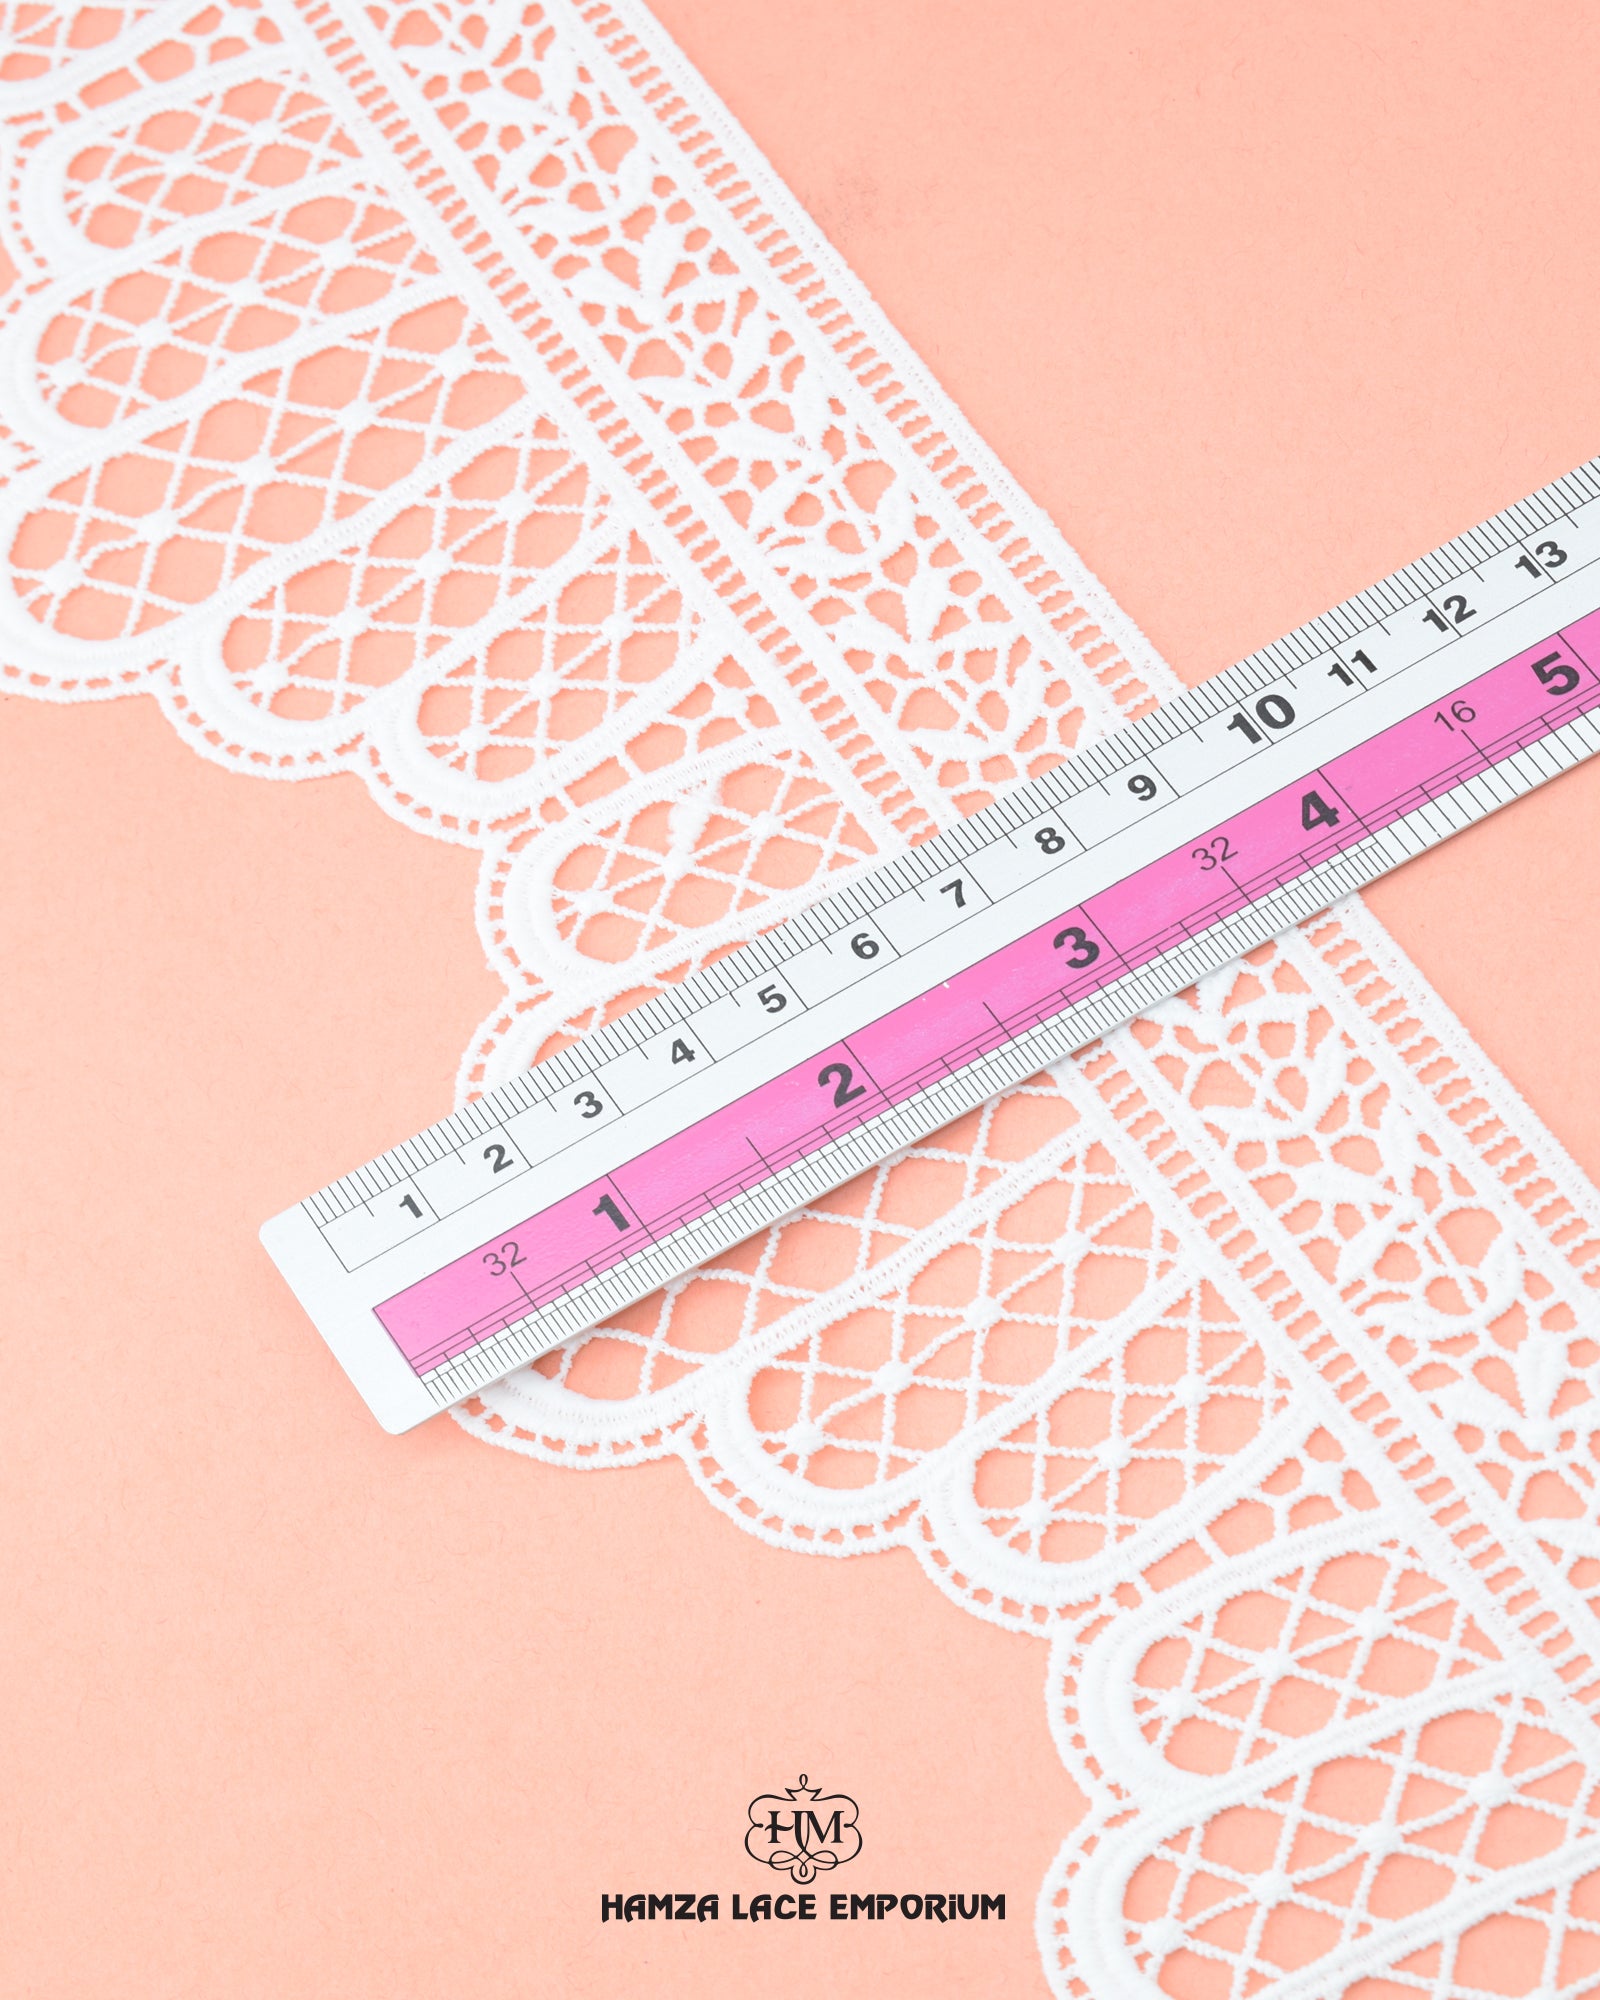 Size of the 'Edging Loop Lace 17224' is shown as '4' inches with the help of a ruler